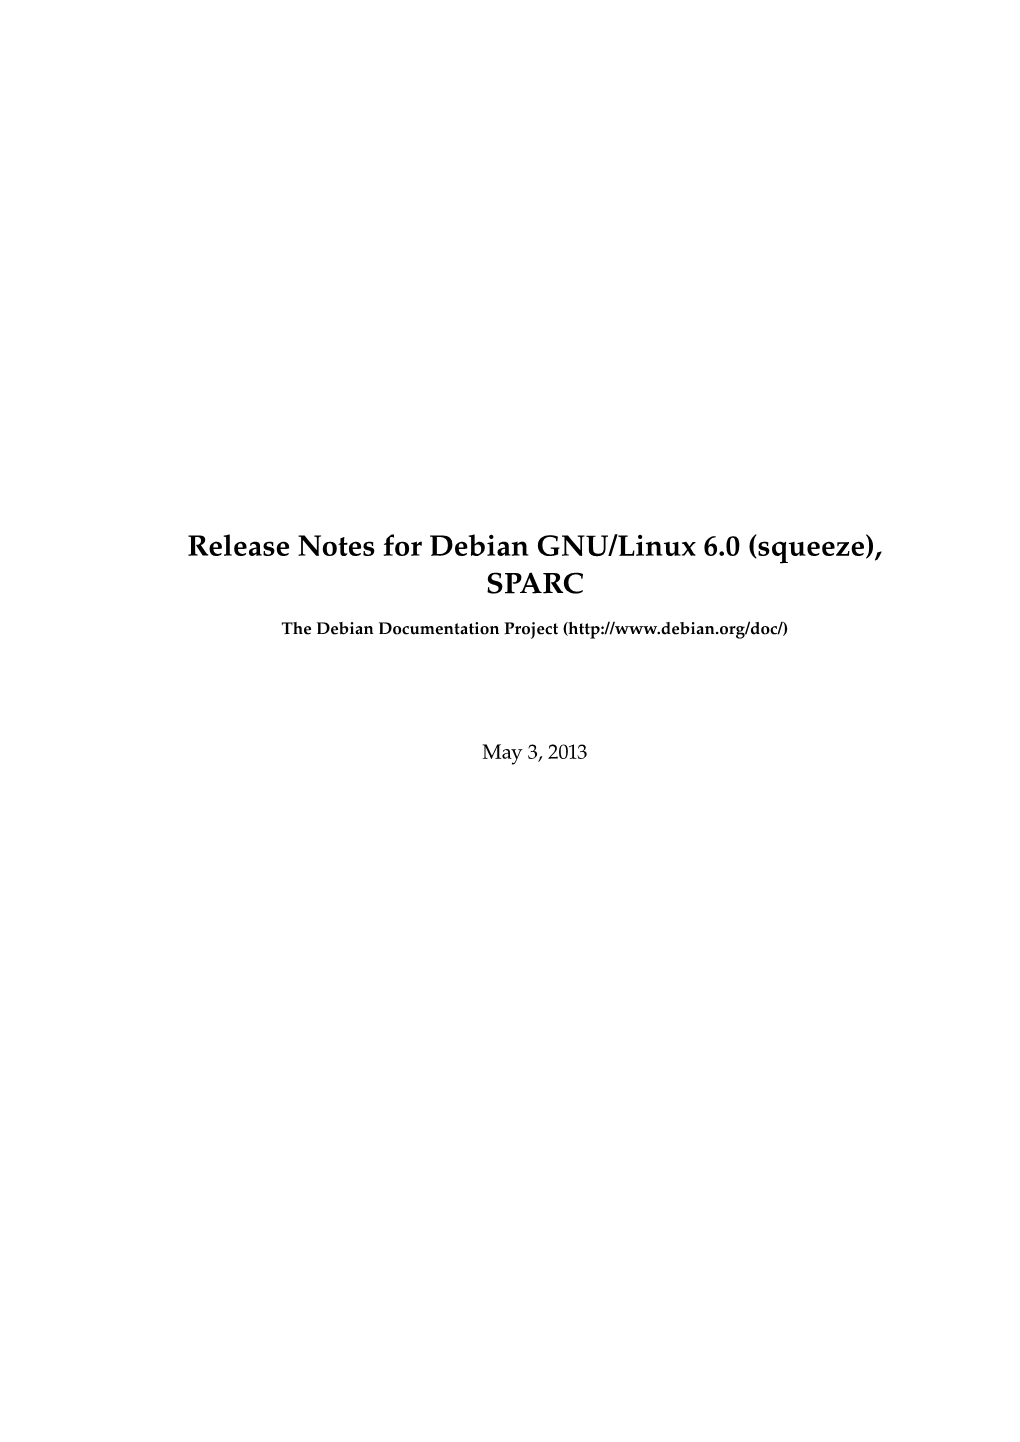 Release Notes for Debian GNU/Linux 6.0 (Squeeze), SPARC